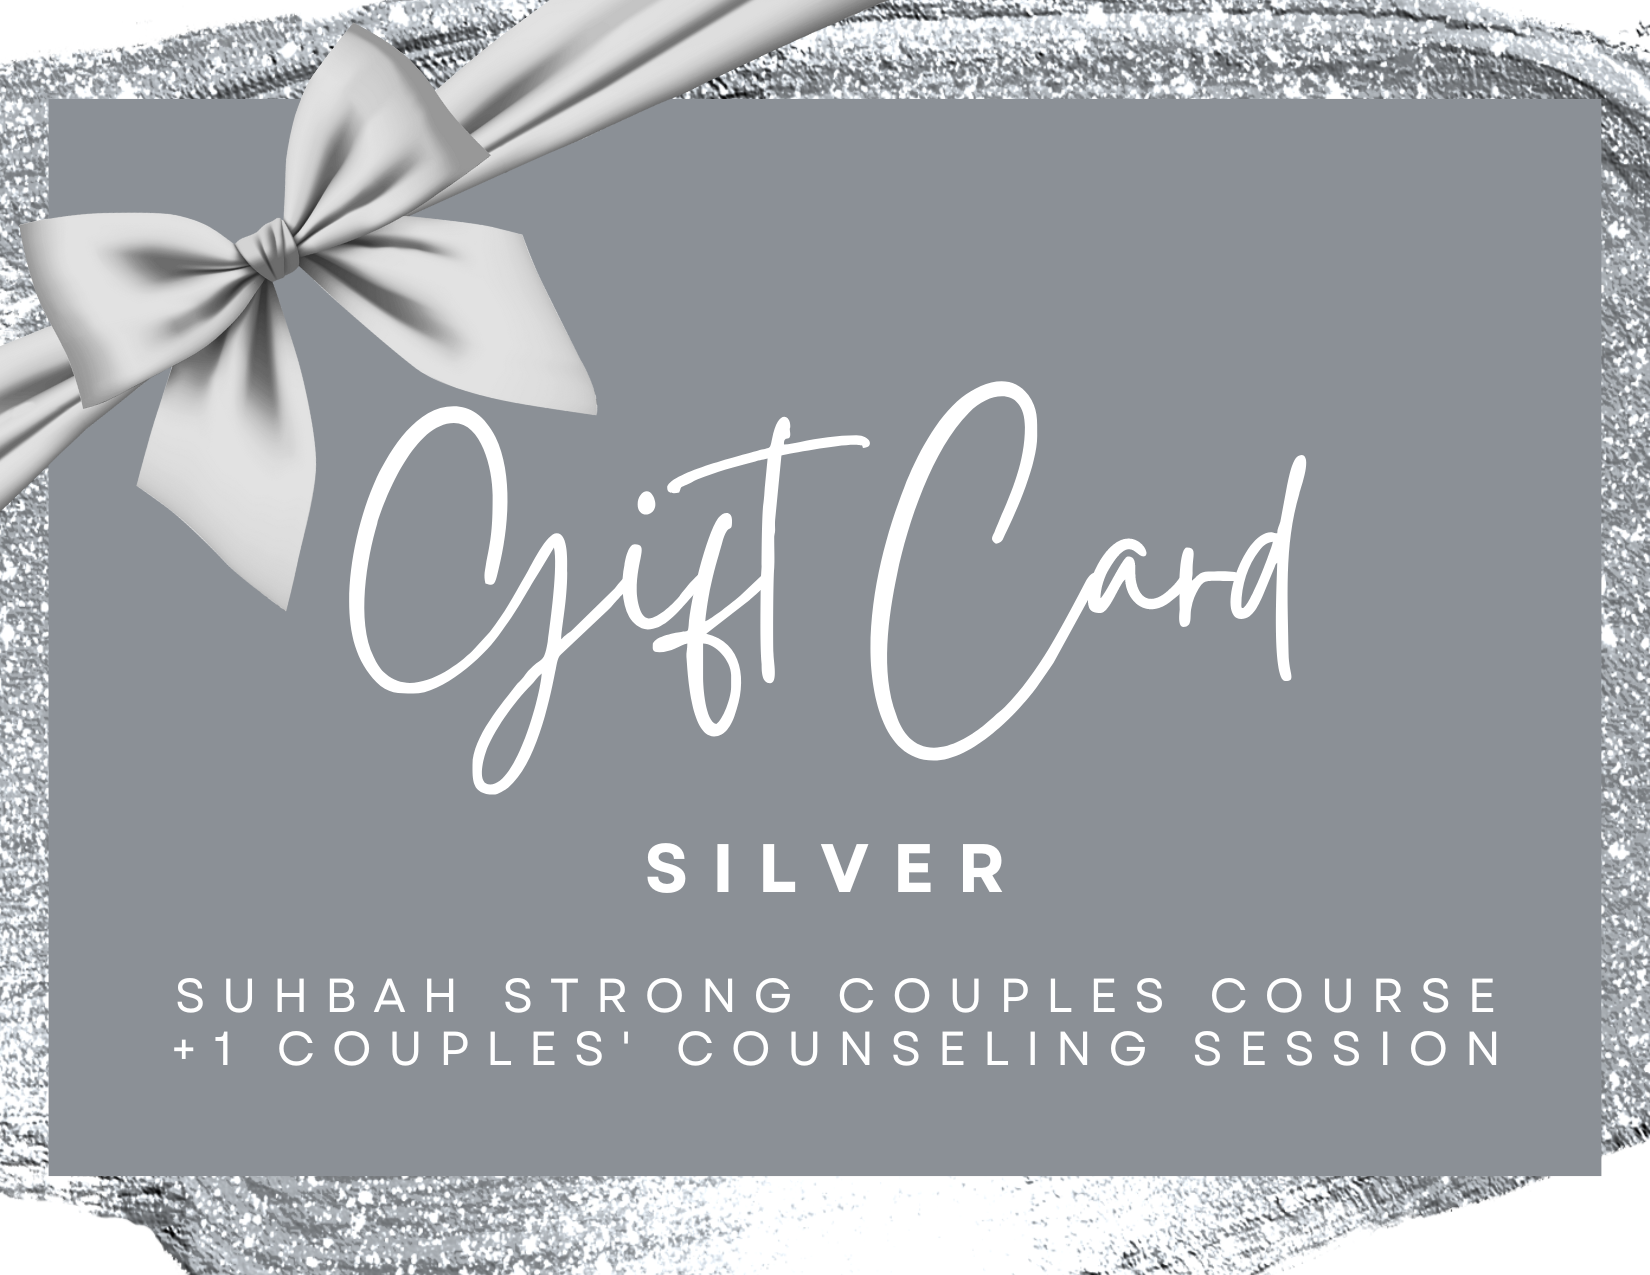 Click to purchase Silver Gift Card